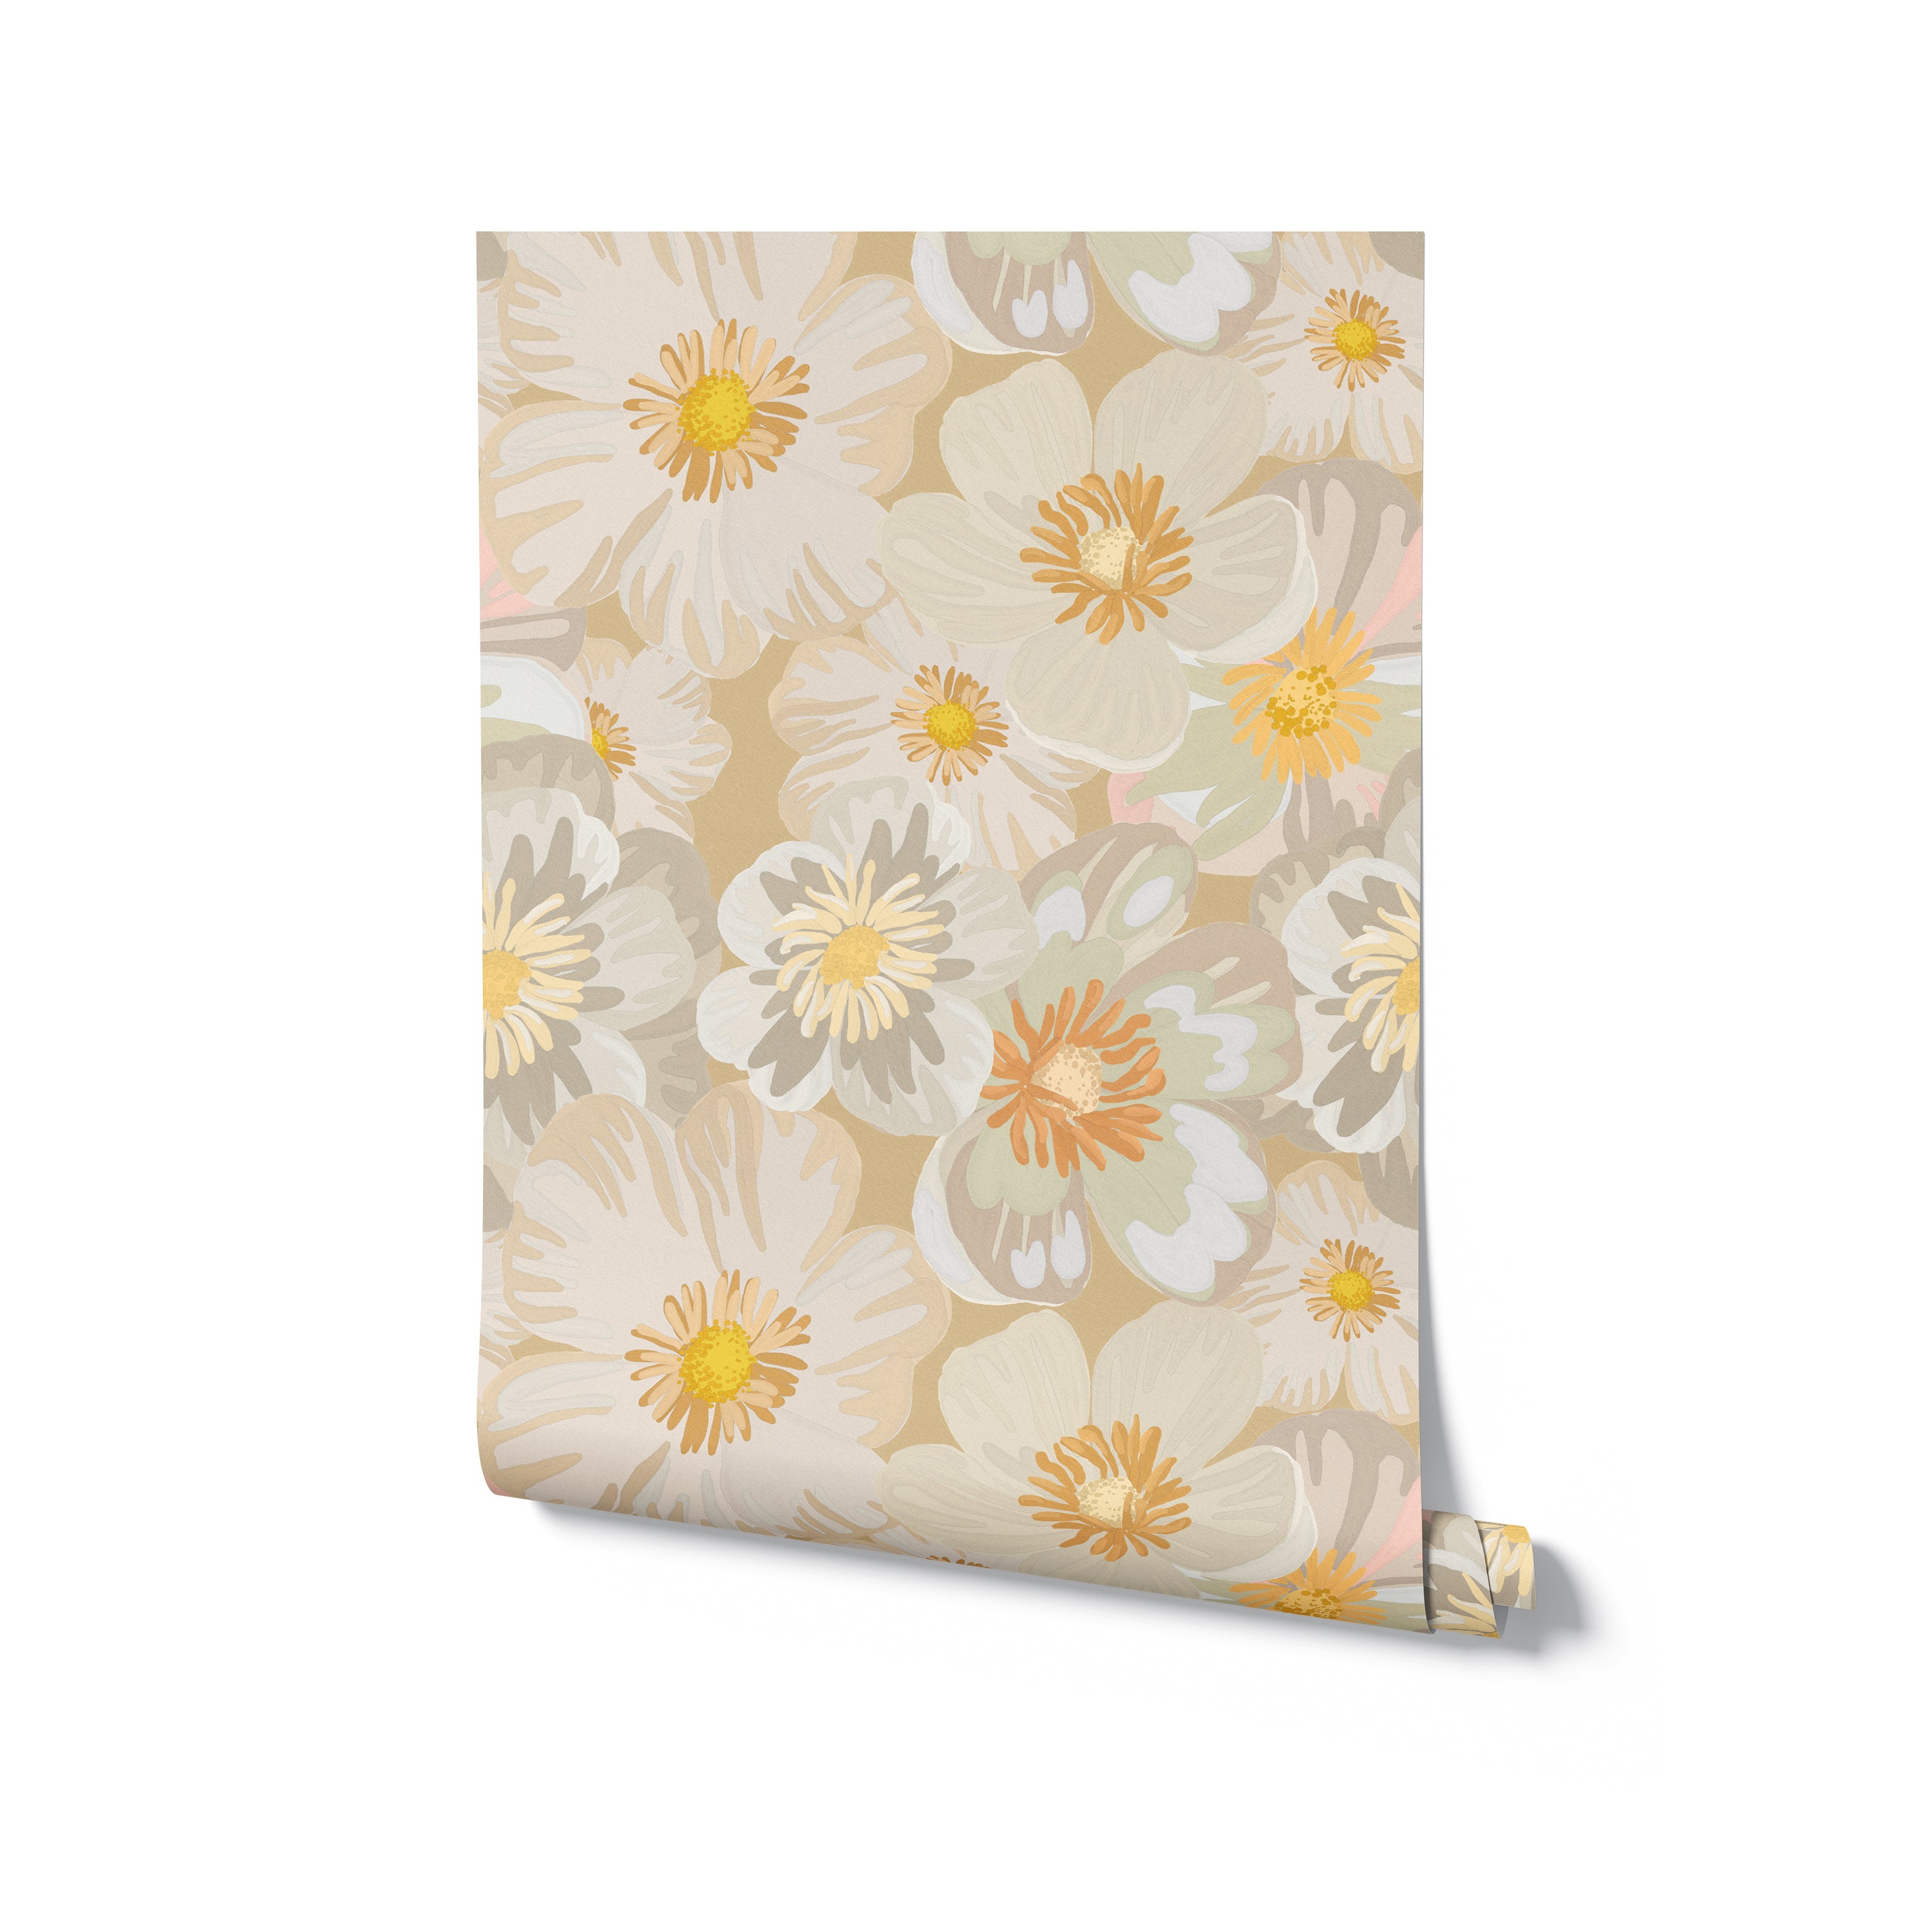 A roll of 'Retro Flower Wallpaper' is presented with the paper slightly unrolled to reveal a pattern of large, stylized flowers in pastel shades on a light tan backdrop, indicative of a retro design aesthetic.